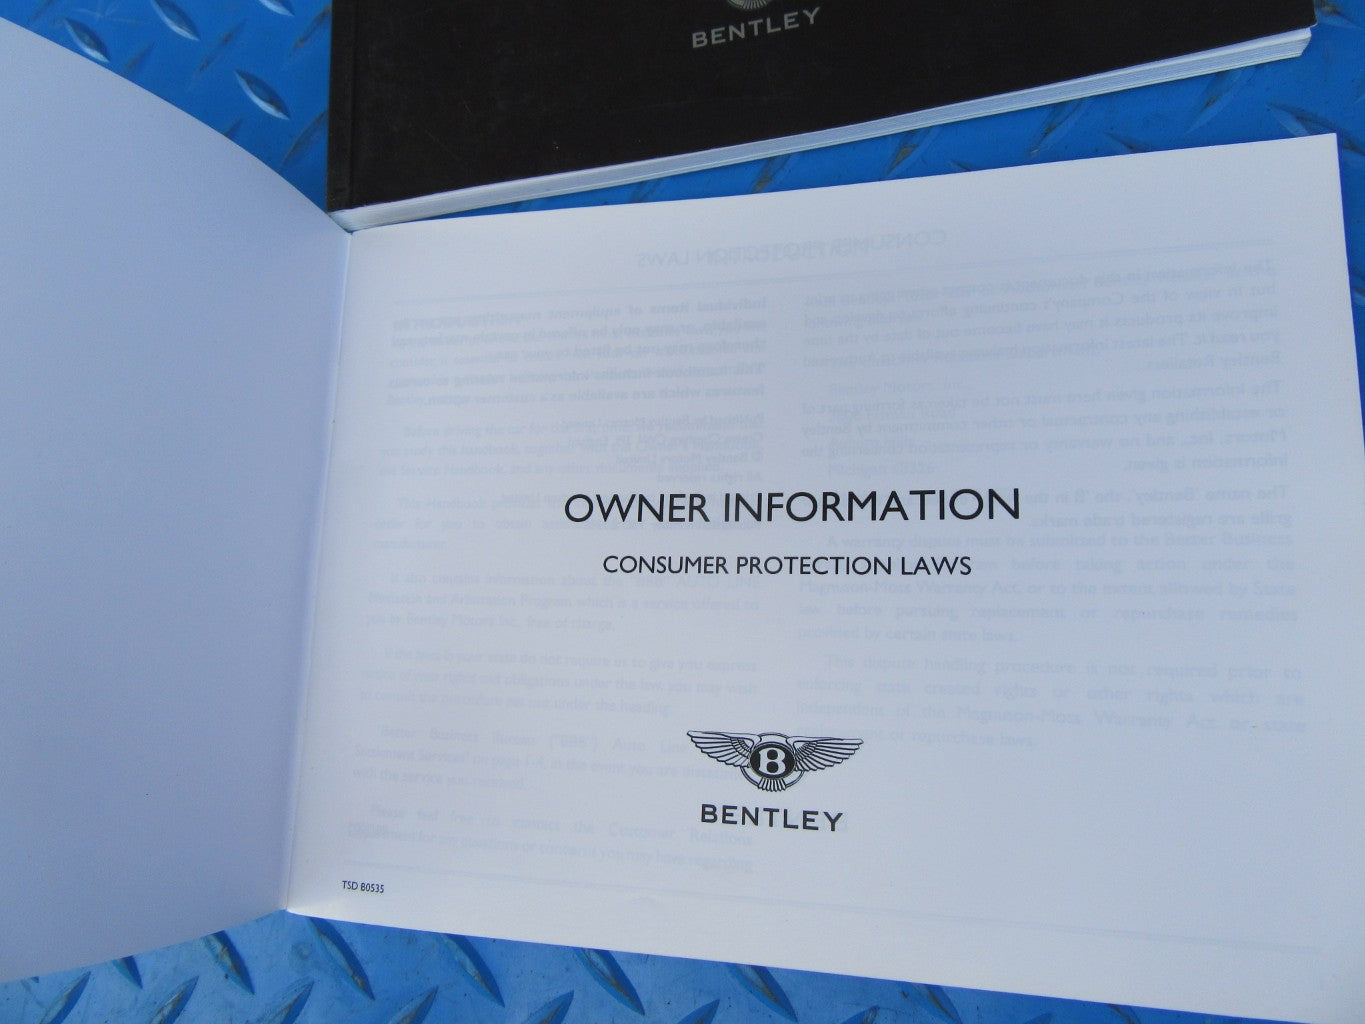 Bentley Continental GT service handbook and consumer protection booklet #0103